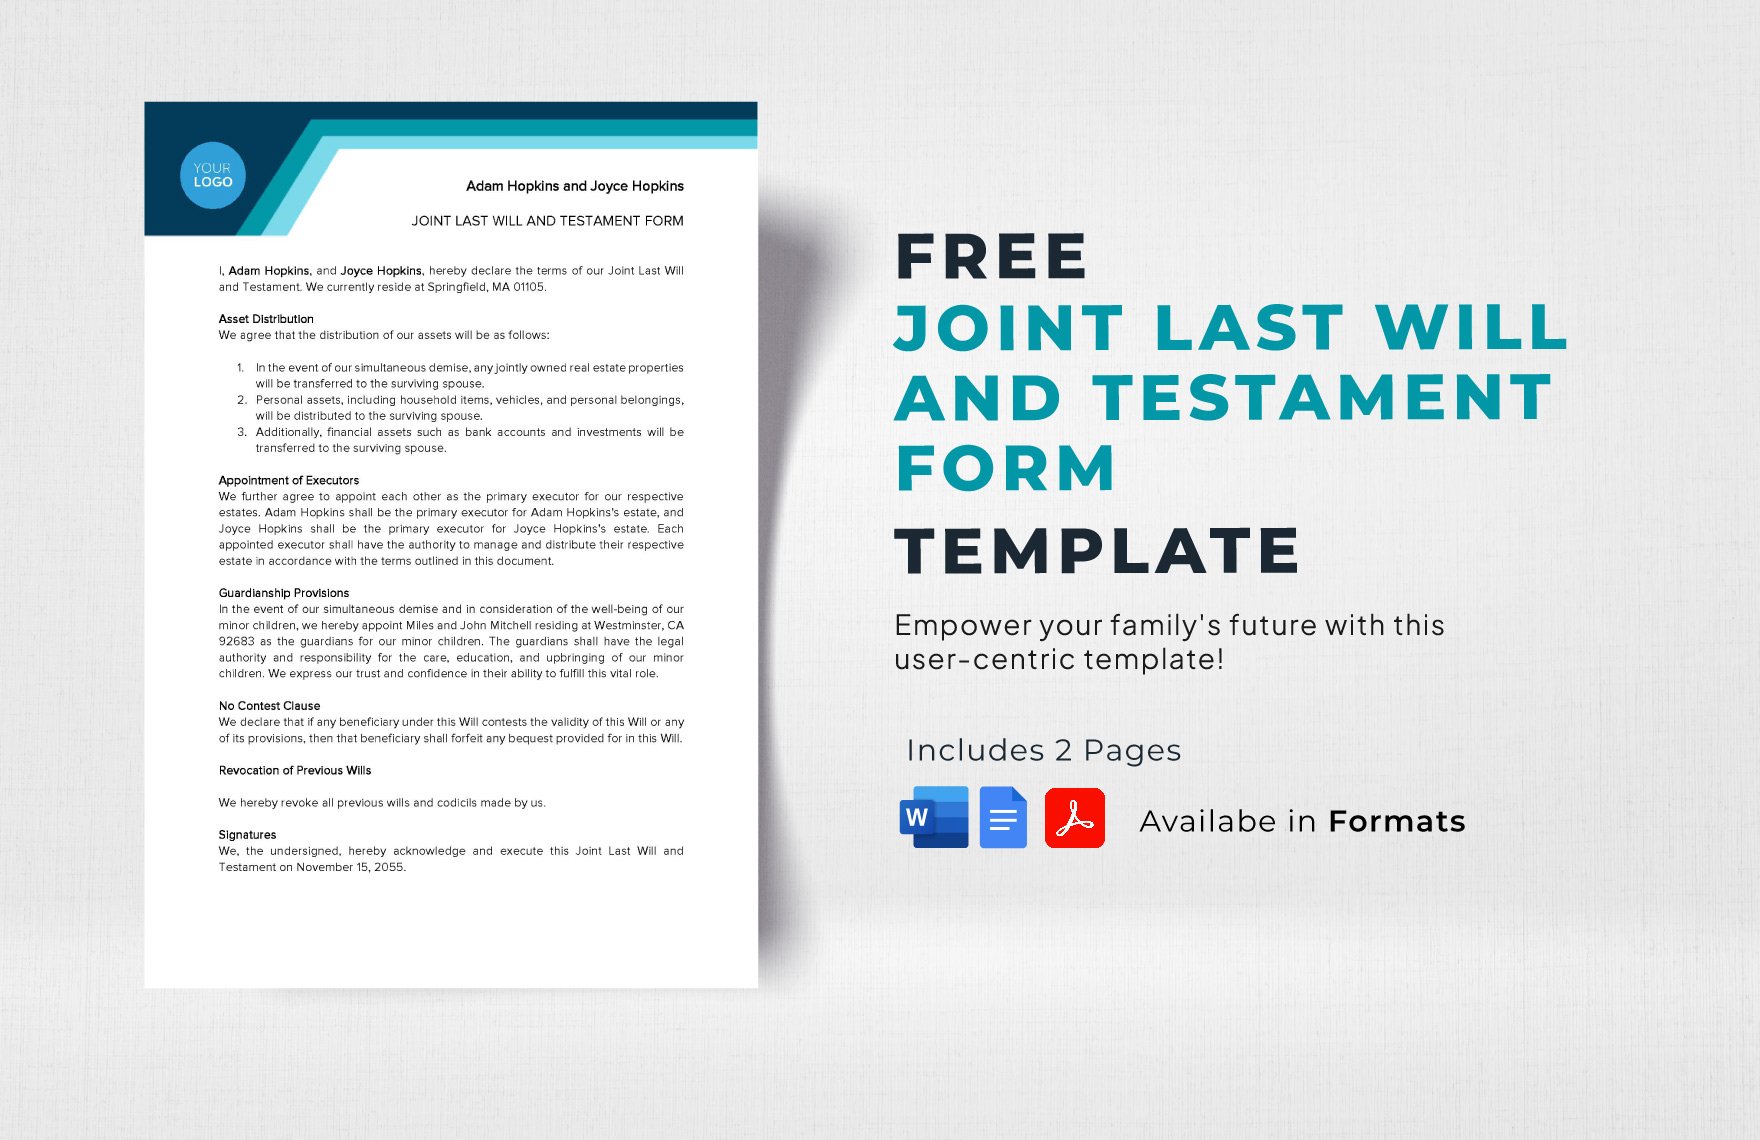 Free Joint Last Will and Testament Form Template in Word, Google Docs, PDF